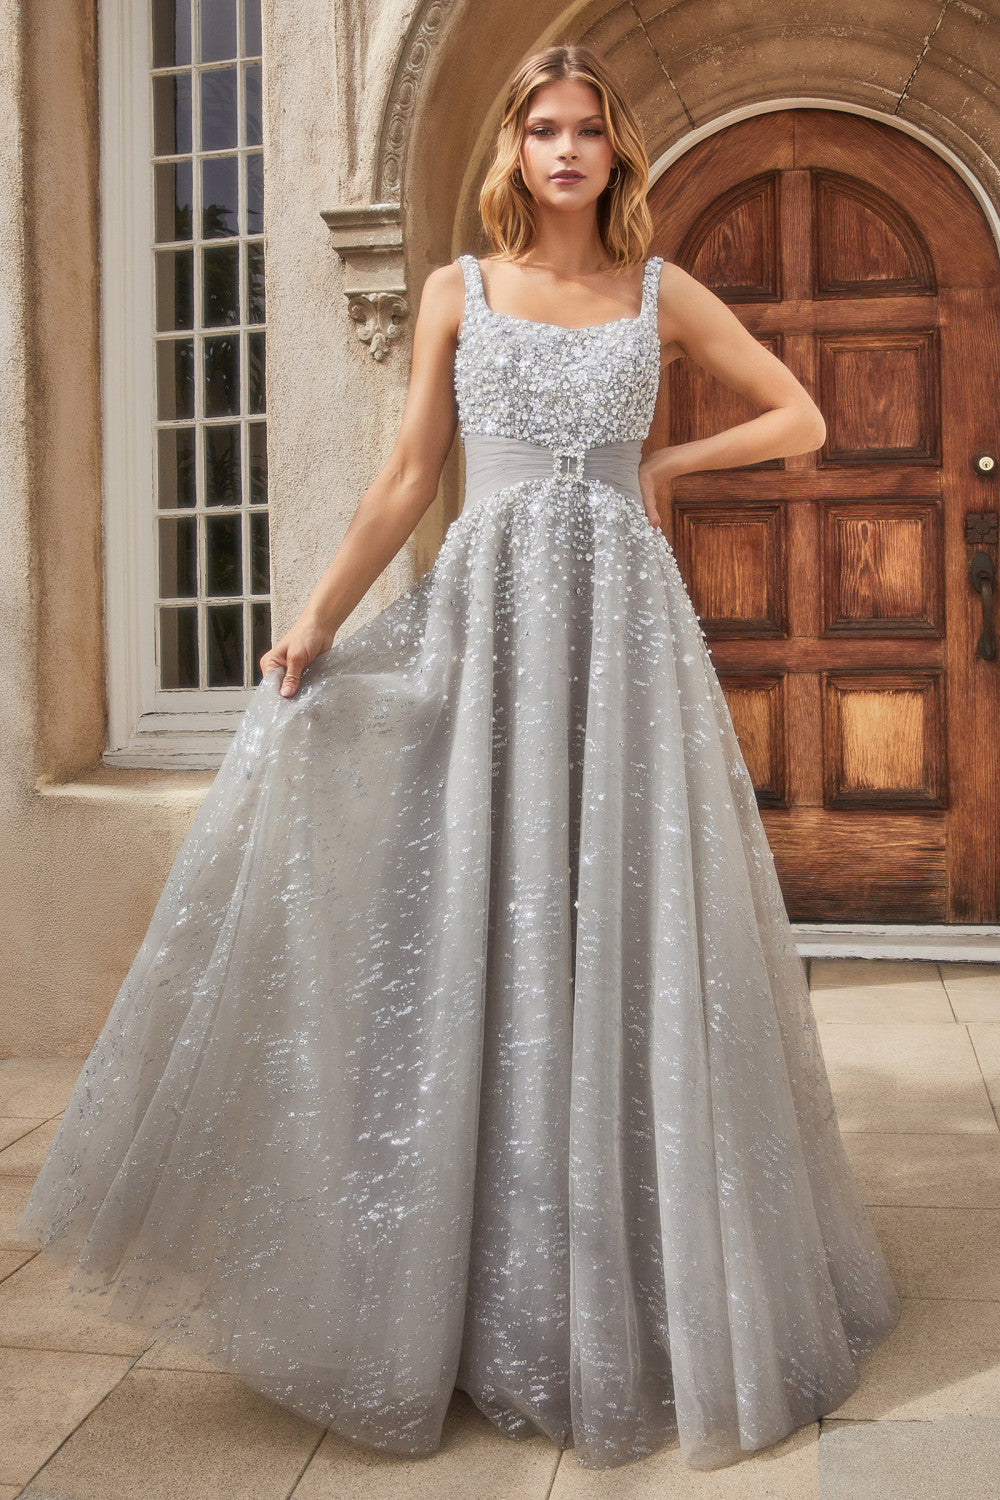 PEARLEQUE BALL GOWN WITH CRYSTAL BUCKLE ALA1181 Elsy Style All dresses